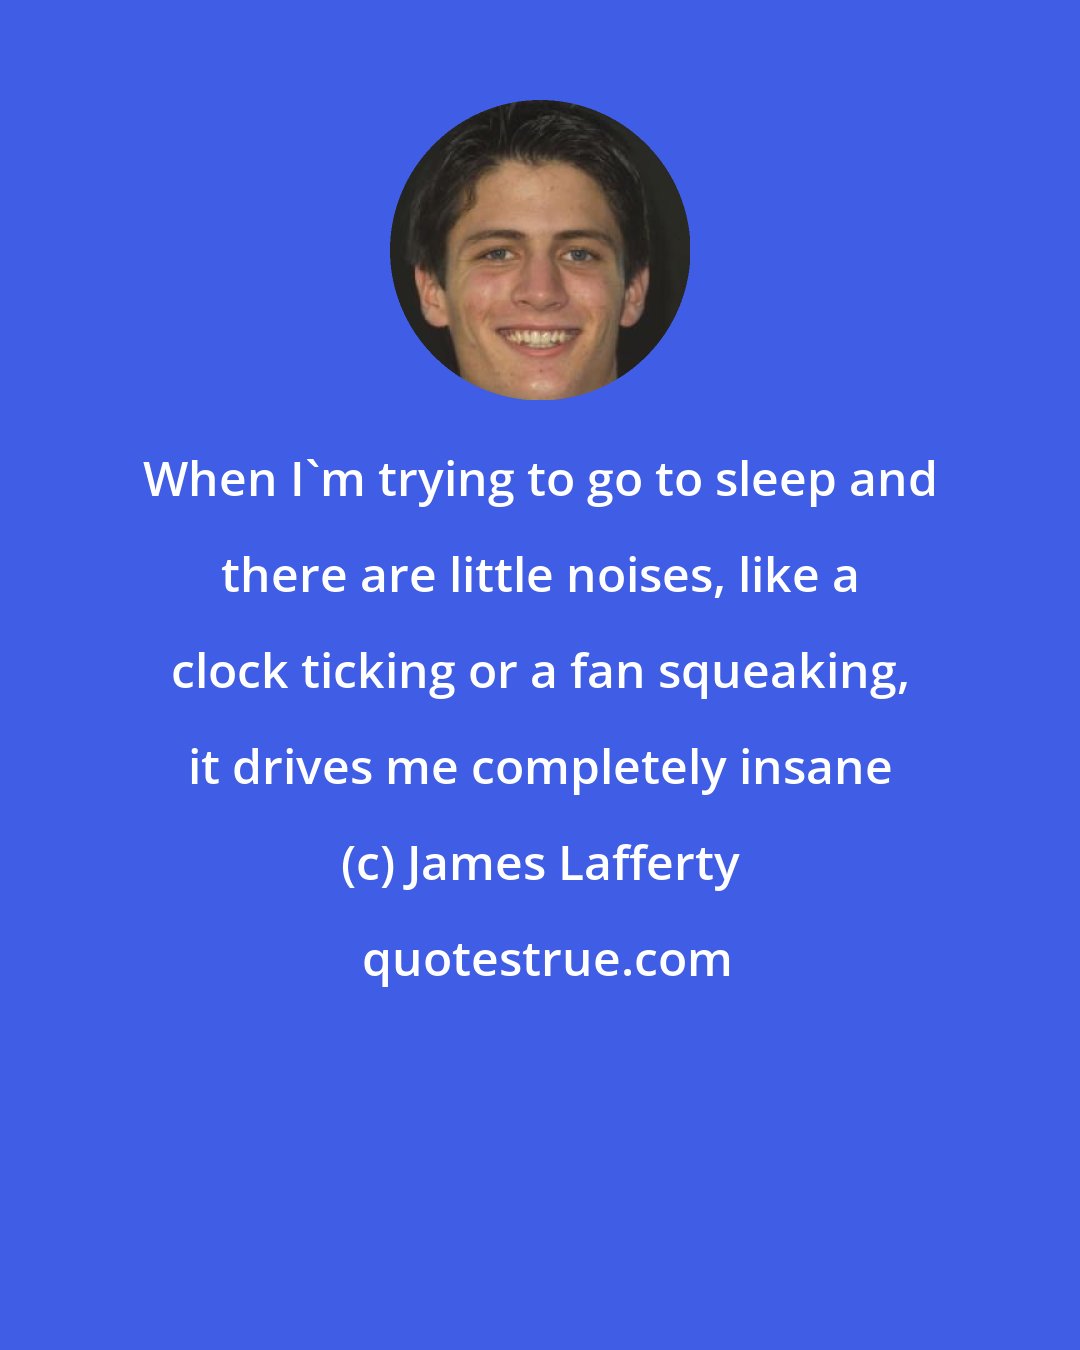 James Lafferty: When I'm trying to go to sleep and there are little noises, like a clock ticking or a fan squeaking, it drives me completely insane